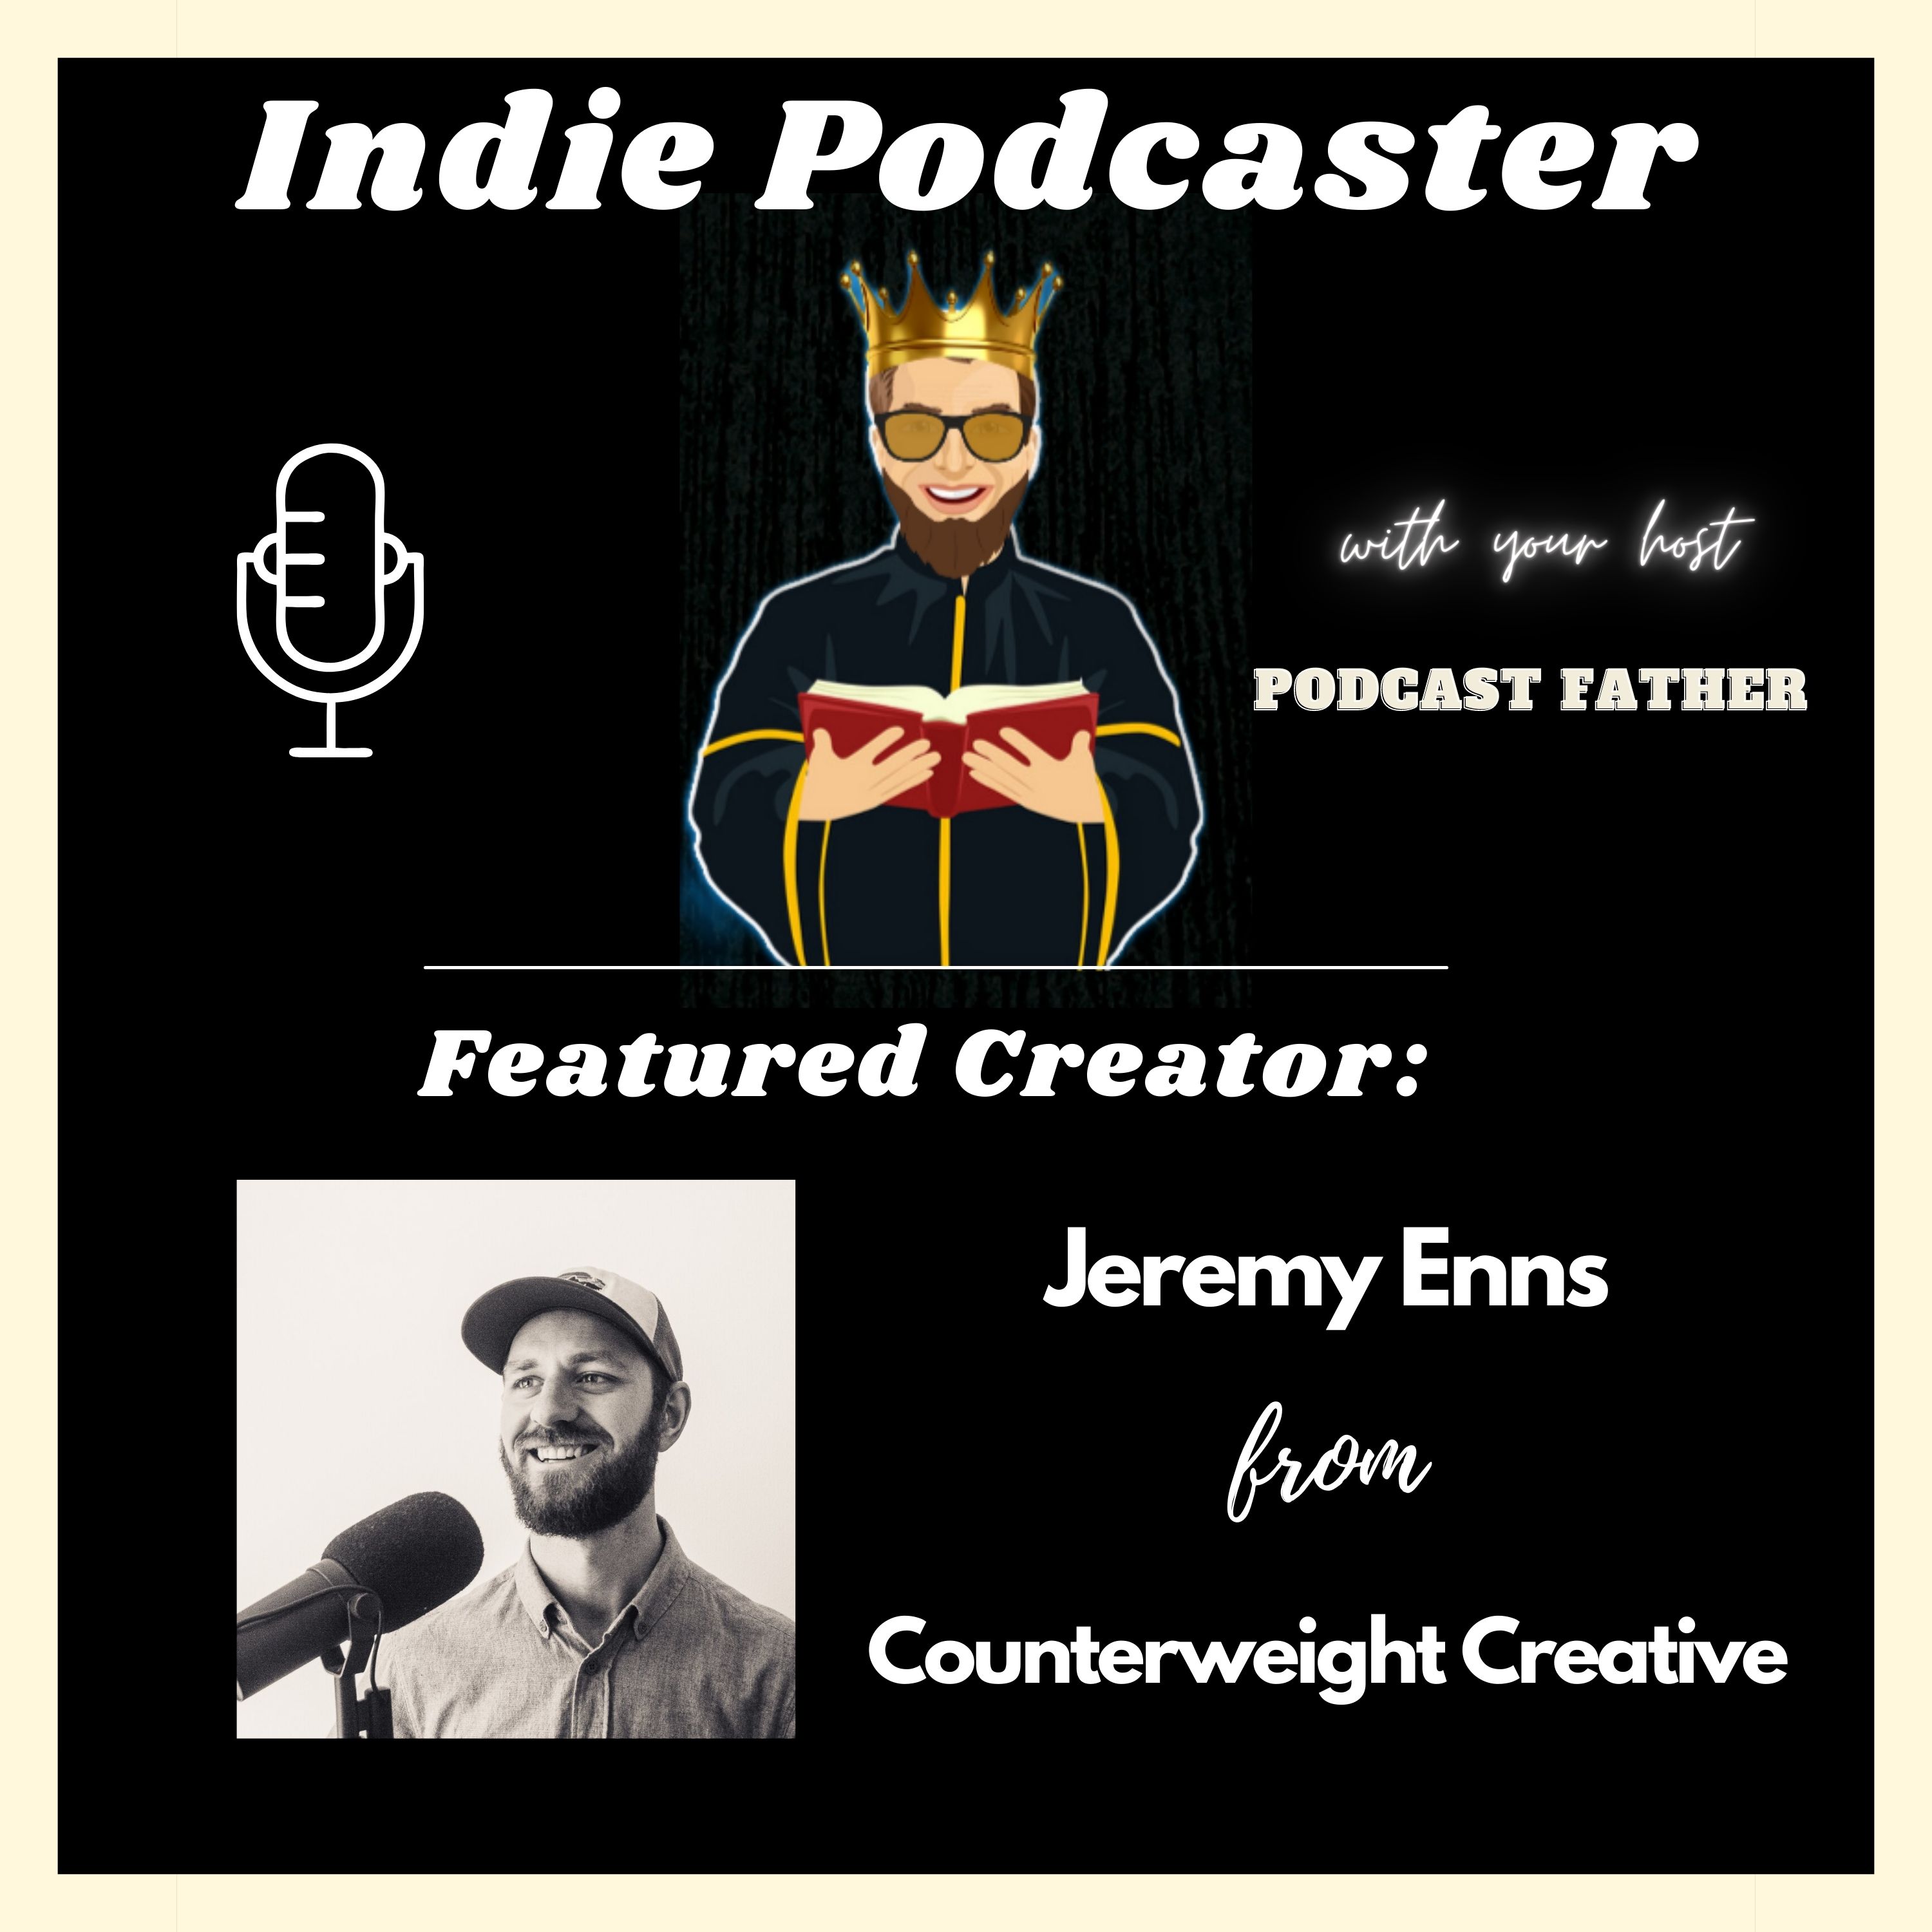 Jeremy Enns from Counterweight Creative Image